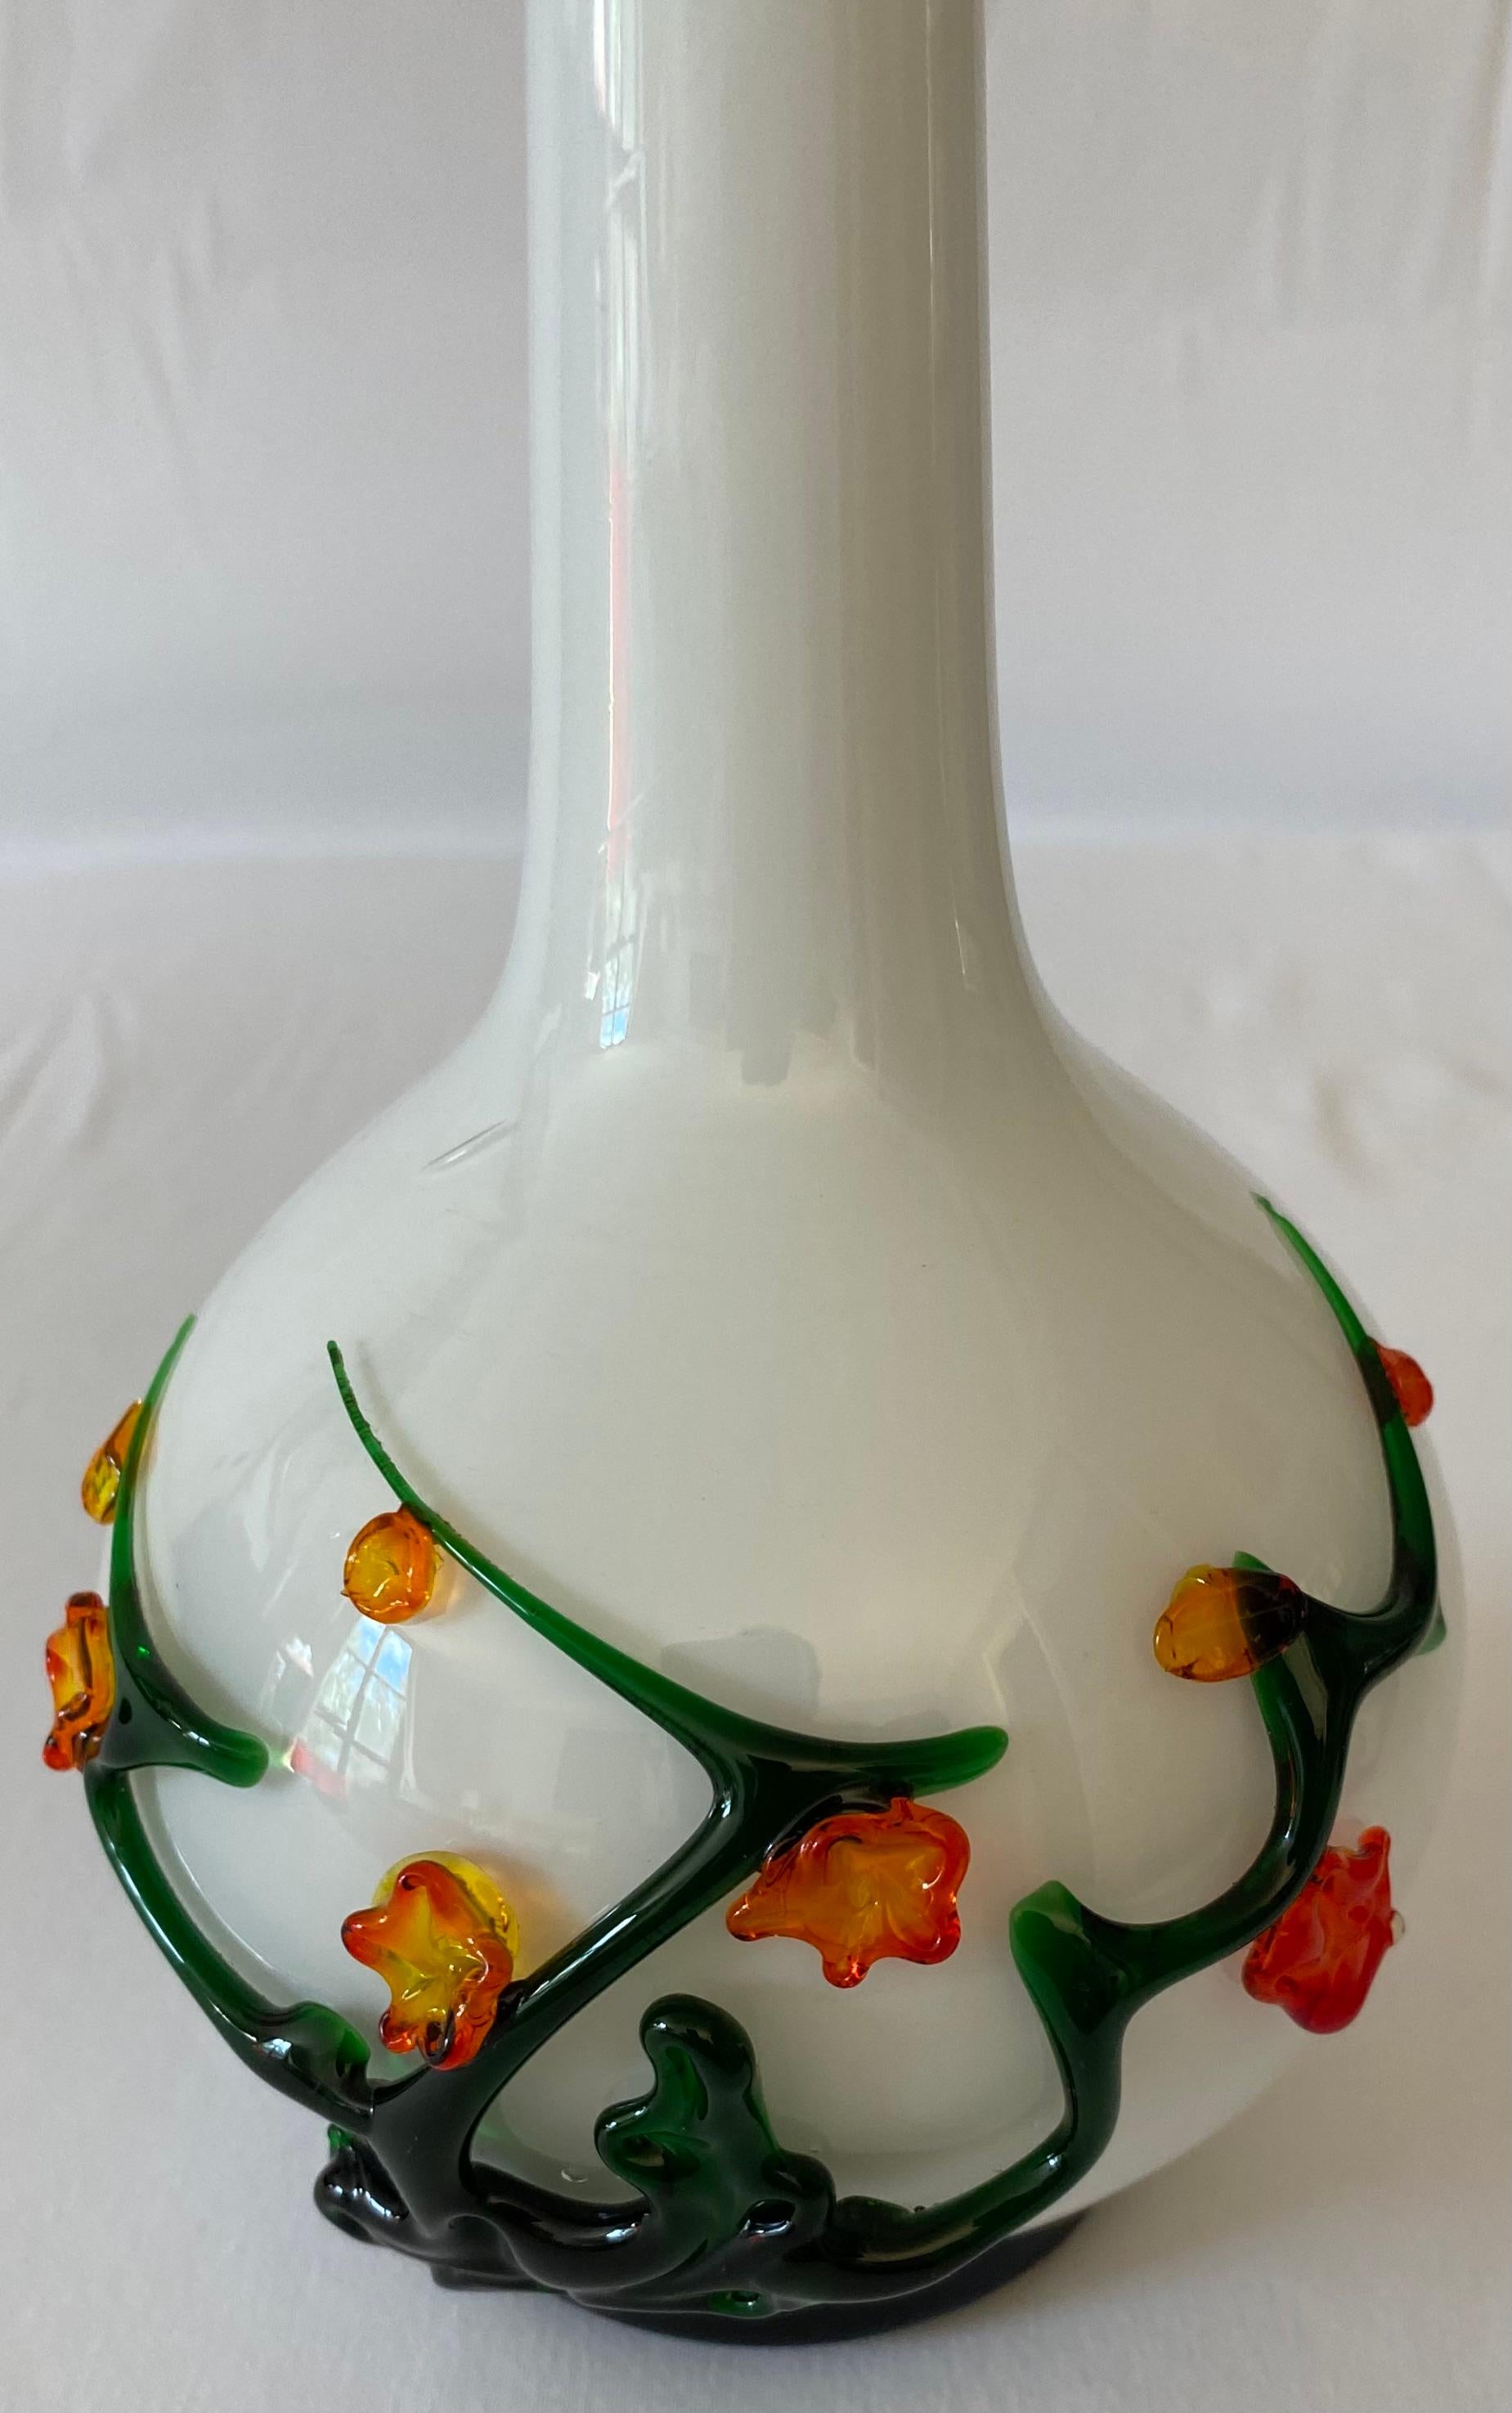 Beautiful Murano blown art glass vase with applied floral decoration.

The lovely floral decoration is applied hot on a white background. Great for displaying your favorite flowers. Would enhance any shelf, table or countertop. 

Measures: 9 1/2